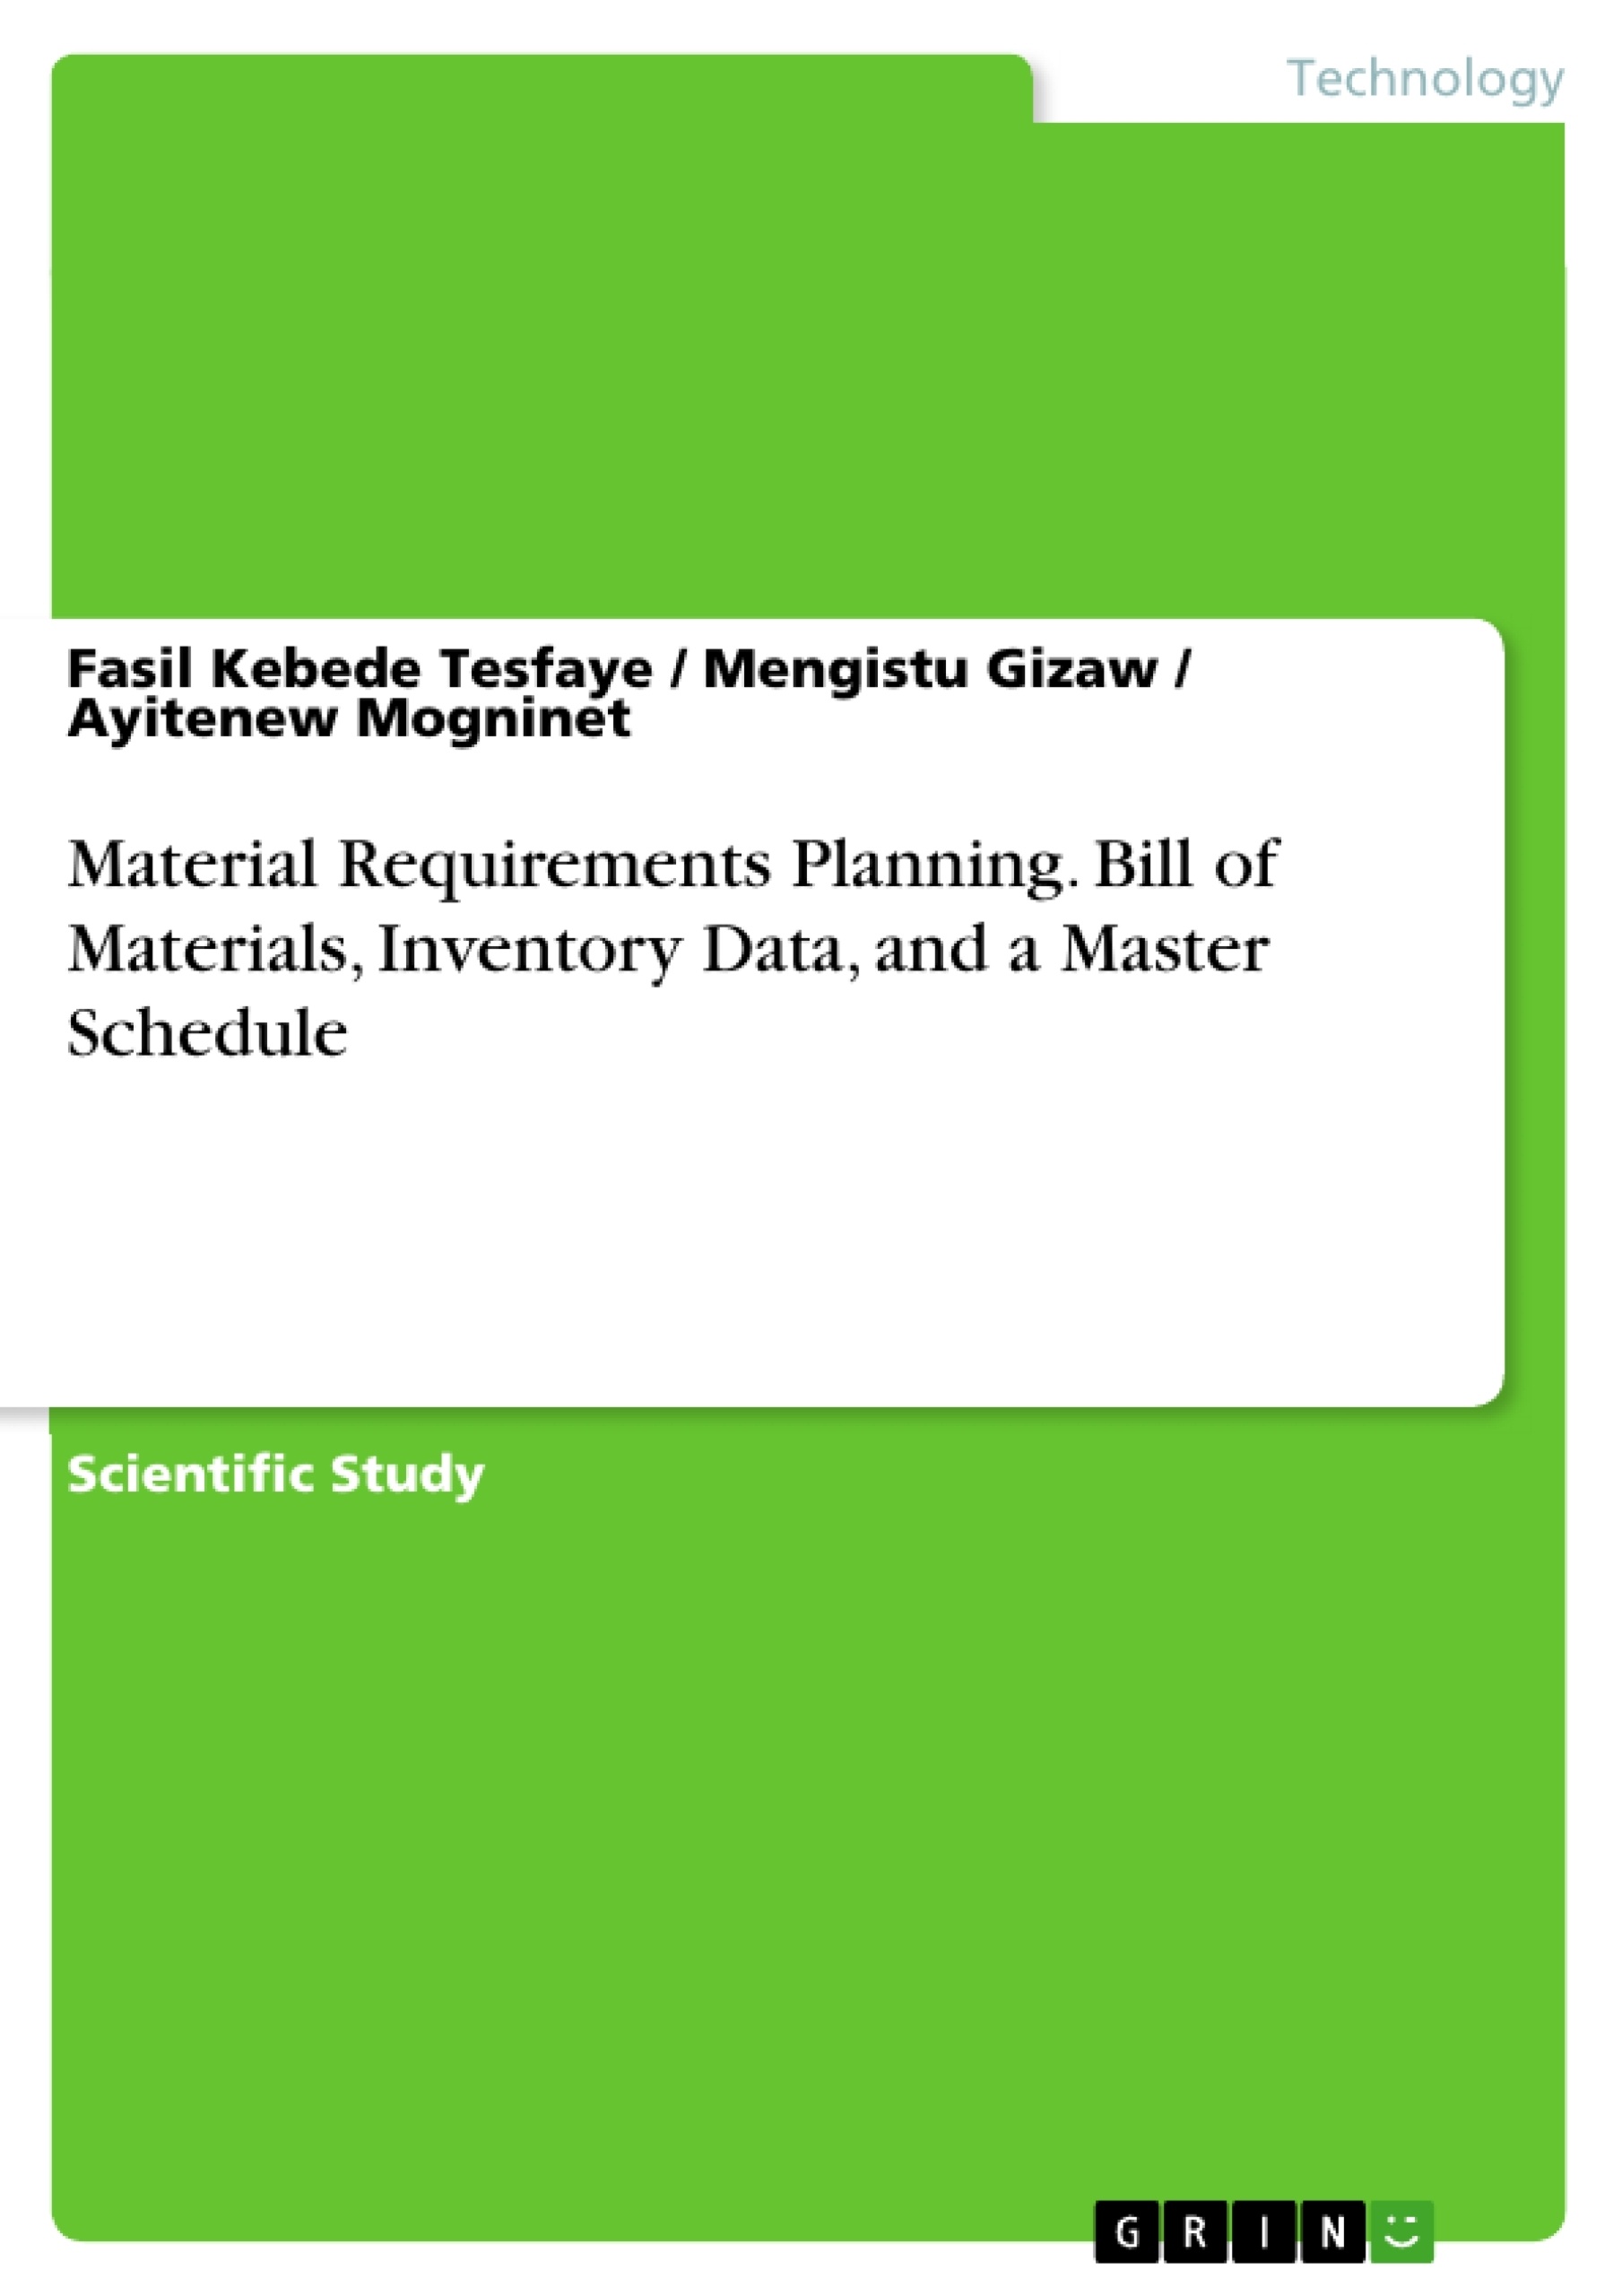 Title: Material Requirements Planning. Bill of Materials, Inventory Data, and a Master Schedule